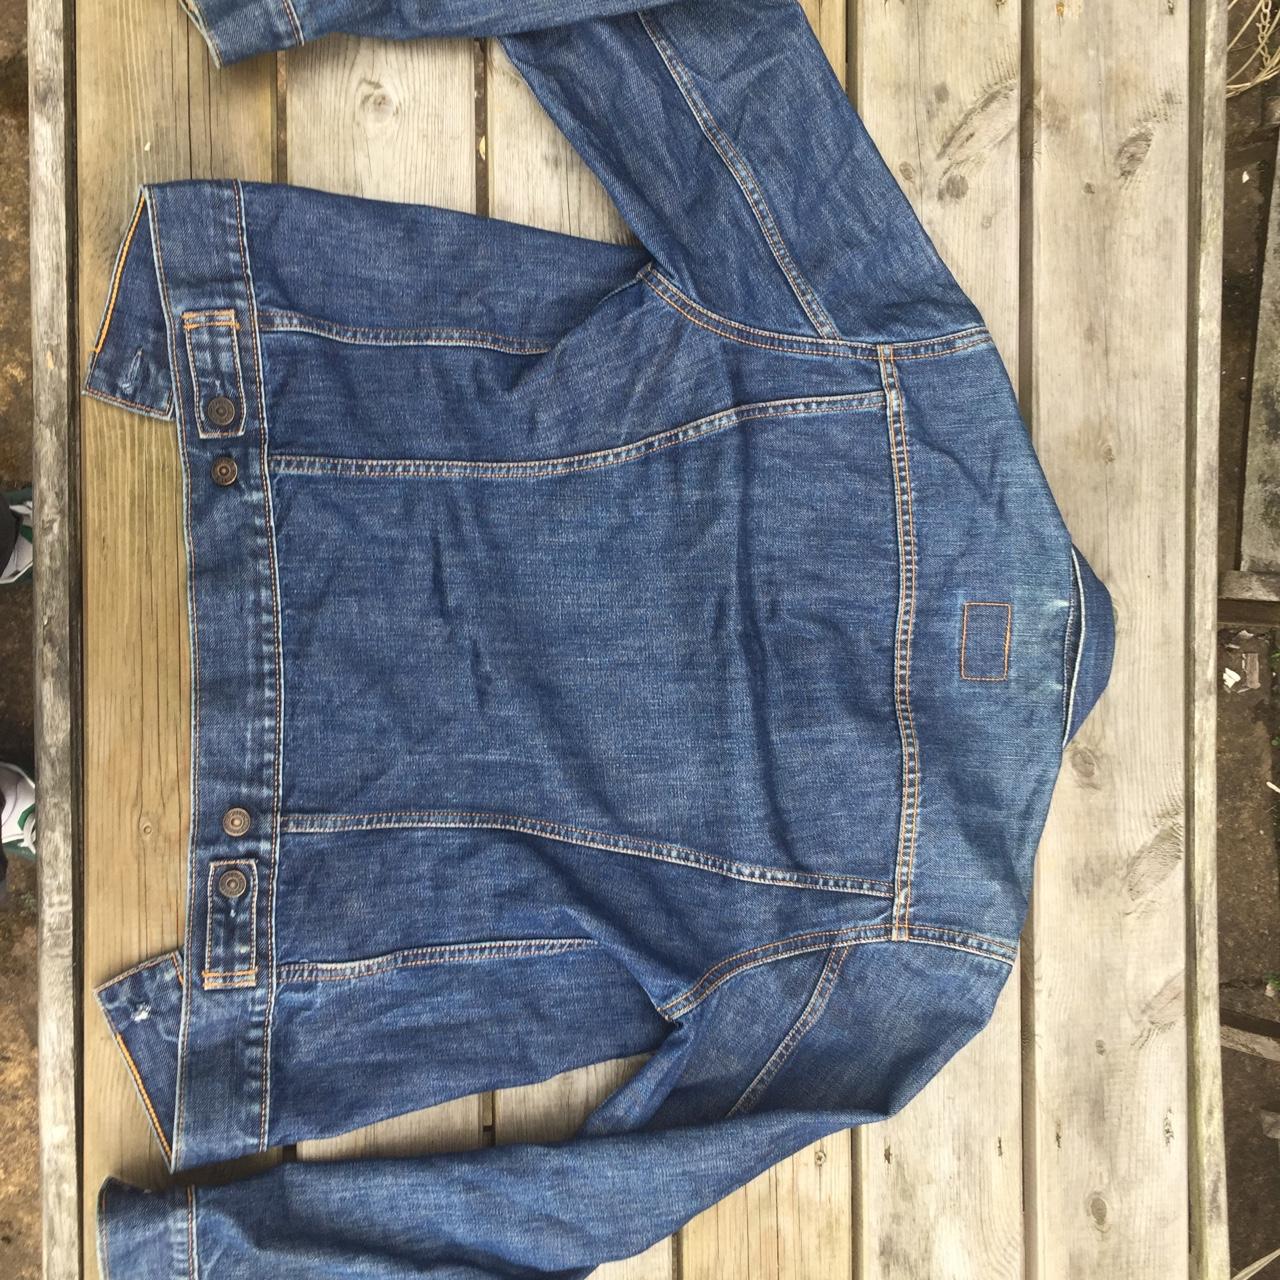 Levi's Strauss & co 70500 04 Really good cut but is - Depop